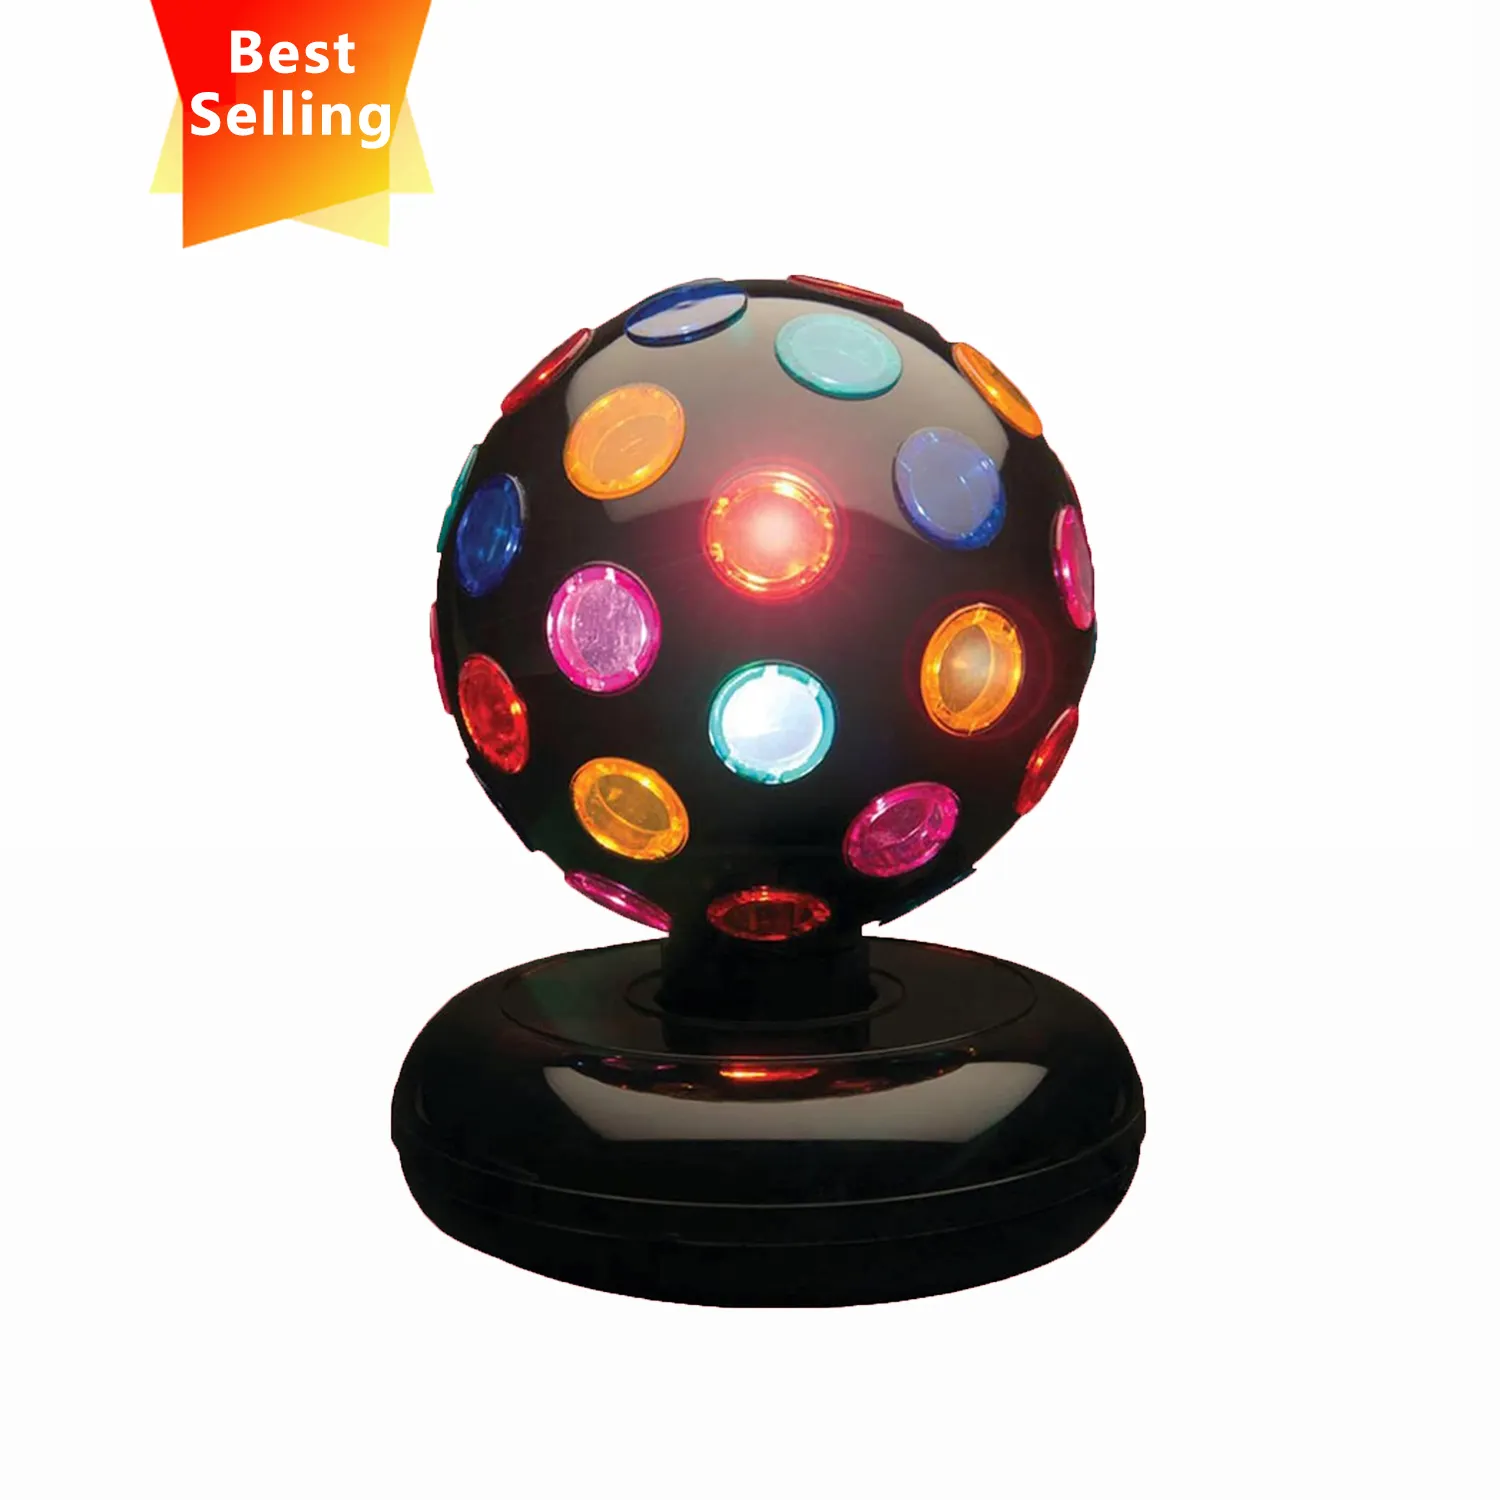 16 Years Super Factory TIANHUA Home Mini Usb Led Disco Ball Stage Decorations Light Product Party Lighting For Ktv Bar Wedding